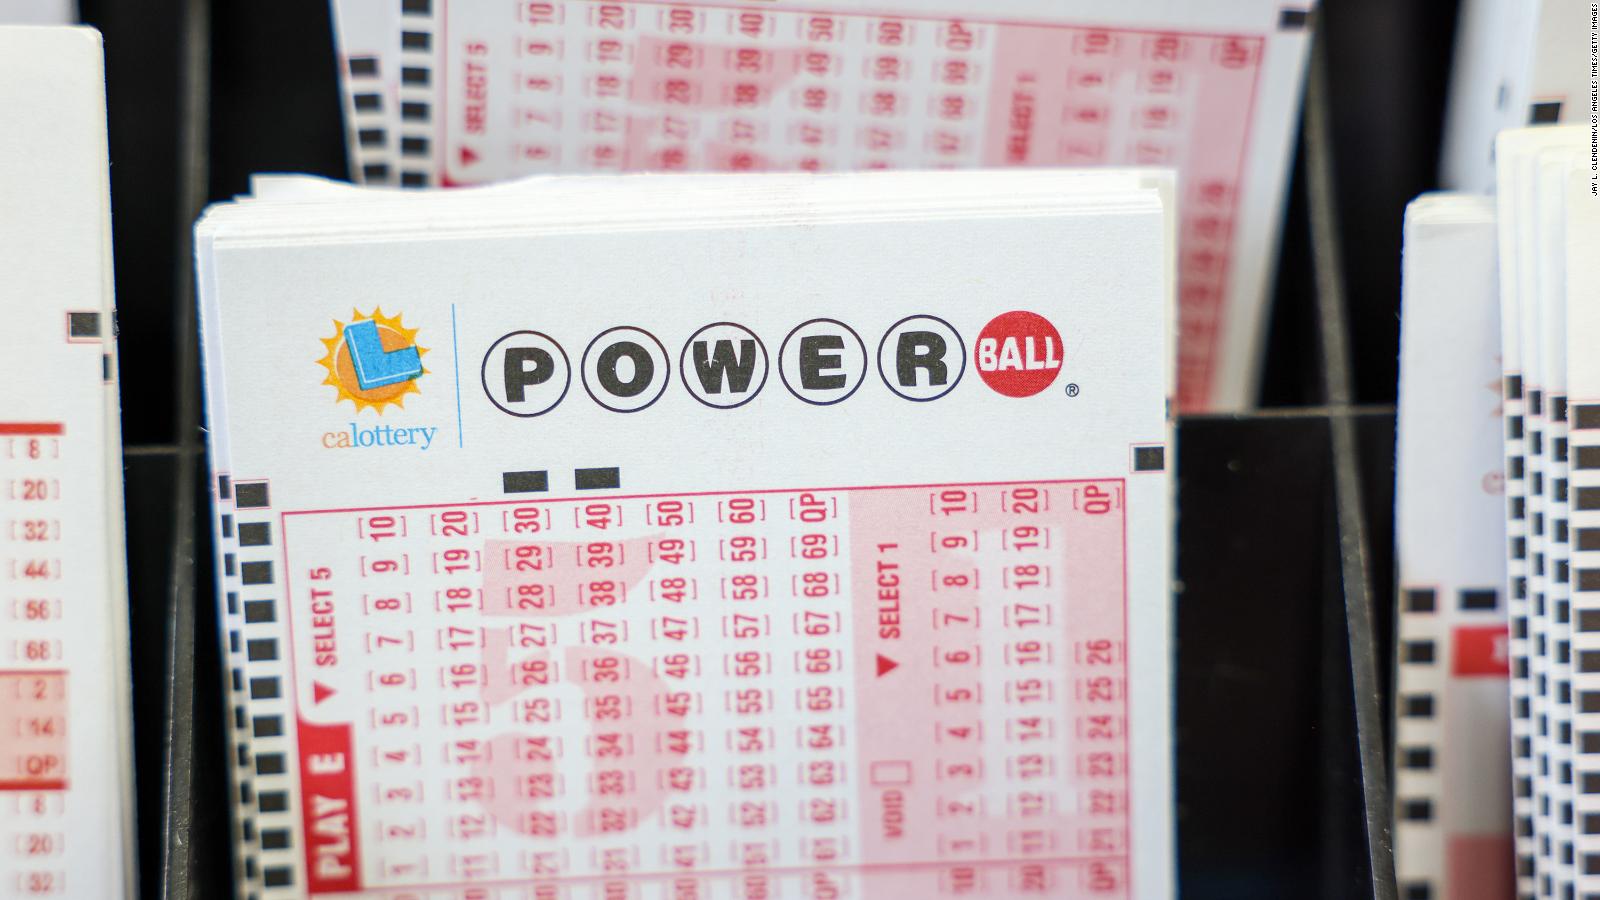 There's $975 million at stake in the Powerball drawing on Monday, April 1